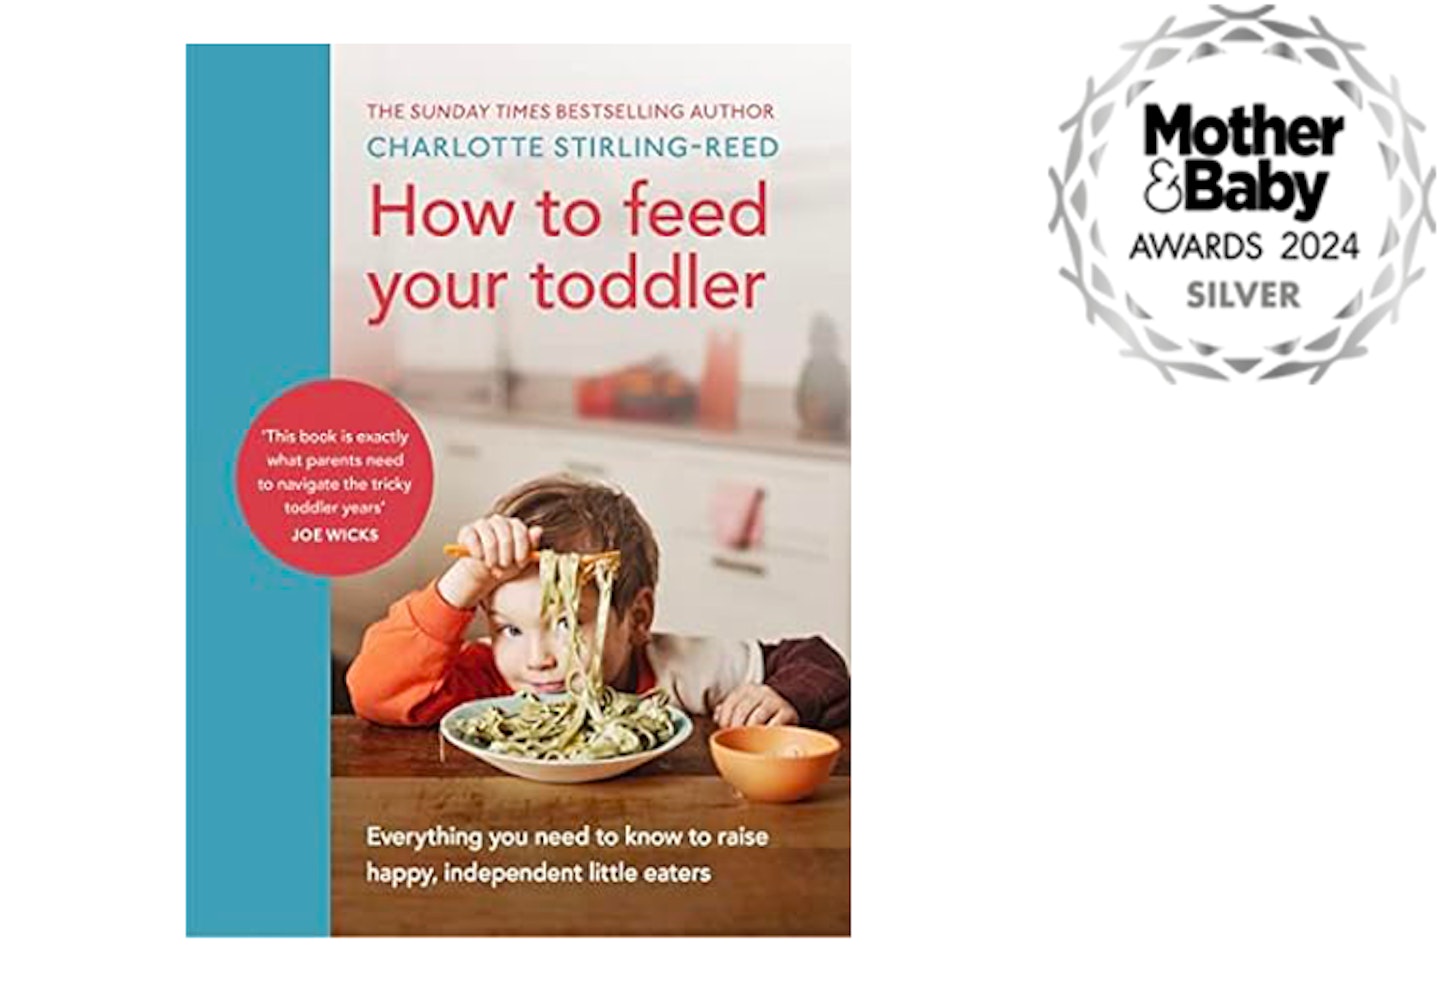 How to Feed Your Toddler by Charlotte Stirling-Reed